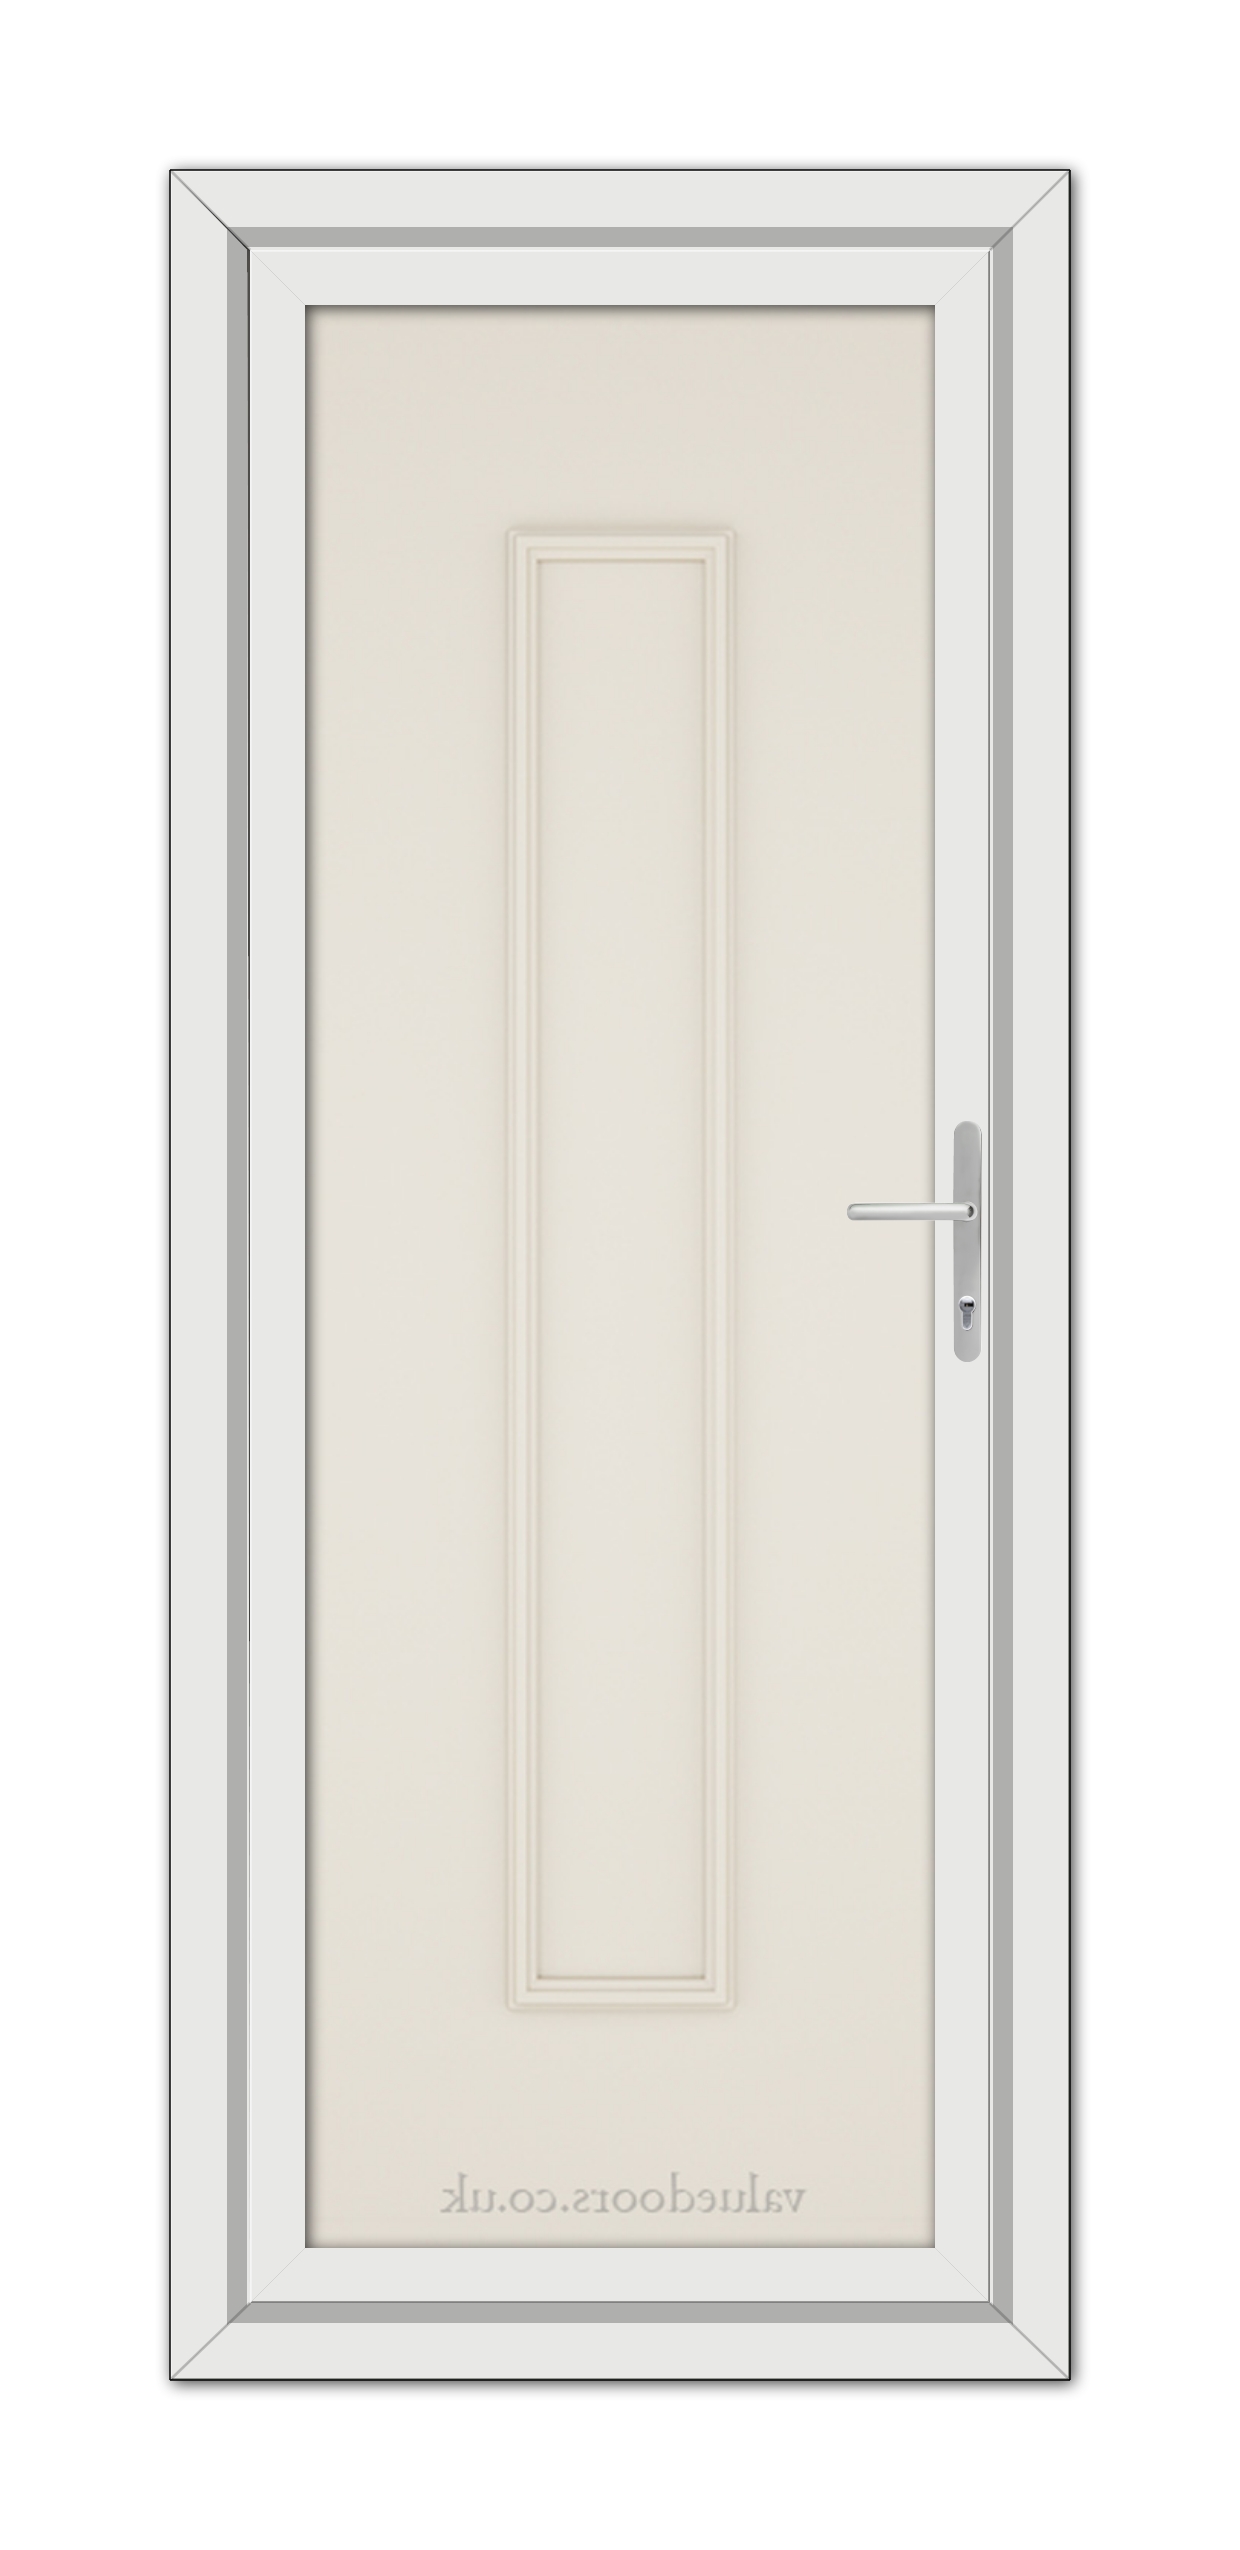 A vertical image of a closed, modern Cream Rome Solid uPVC Door with a silver handle, set within a white frame.